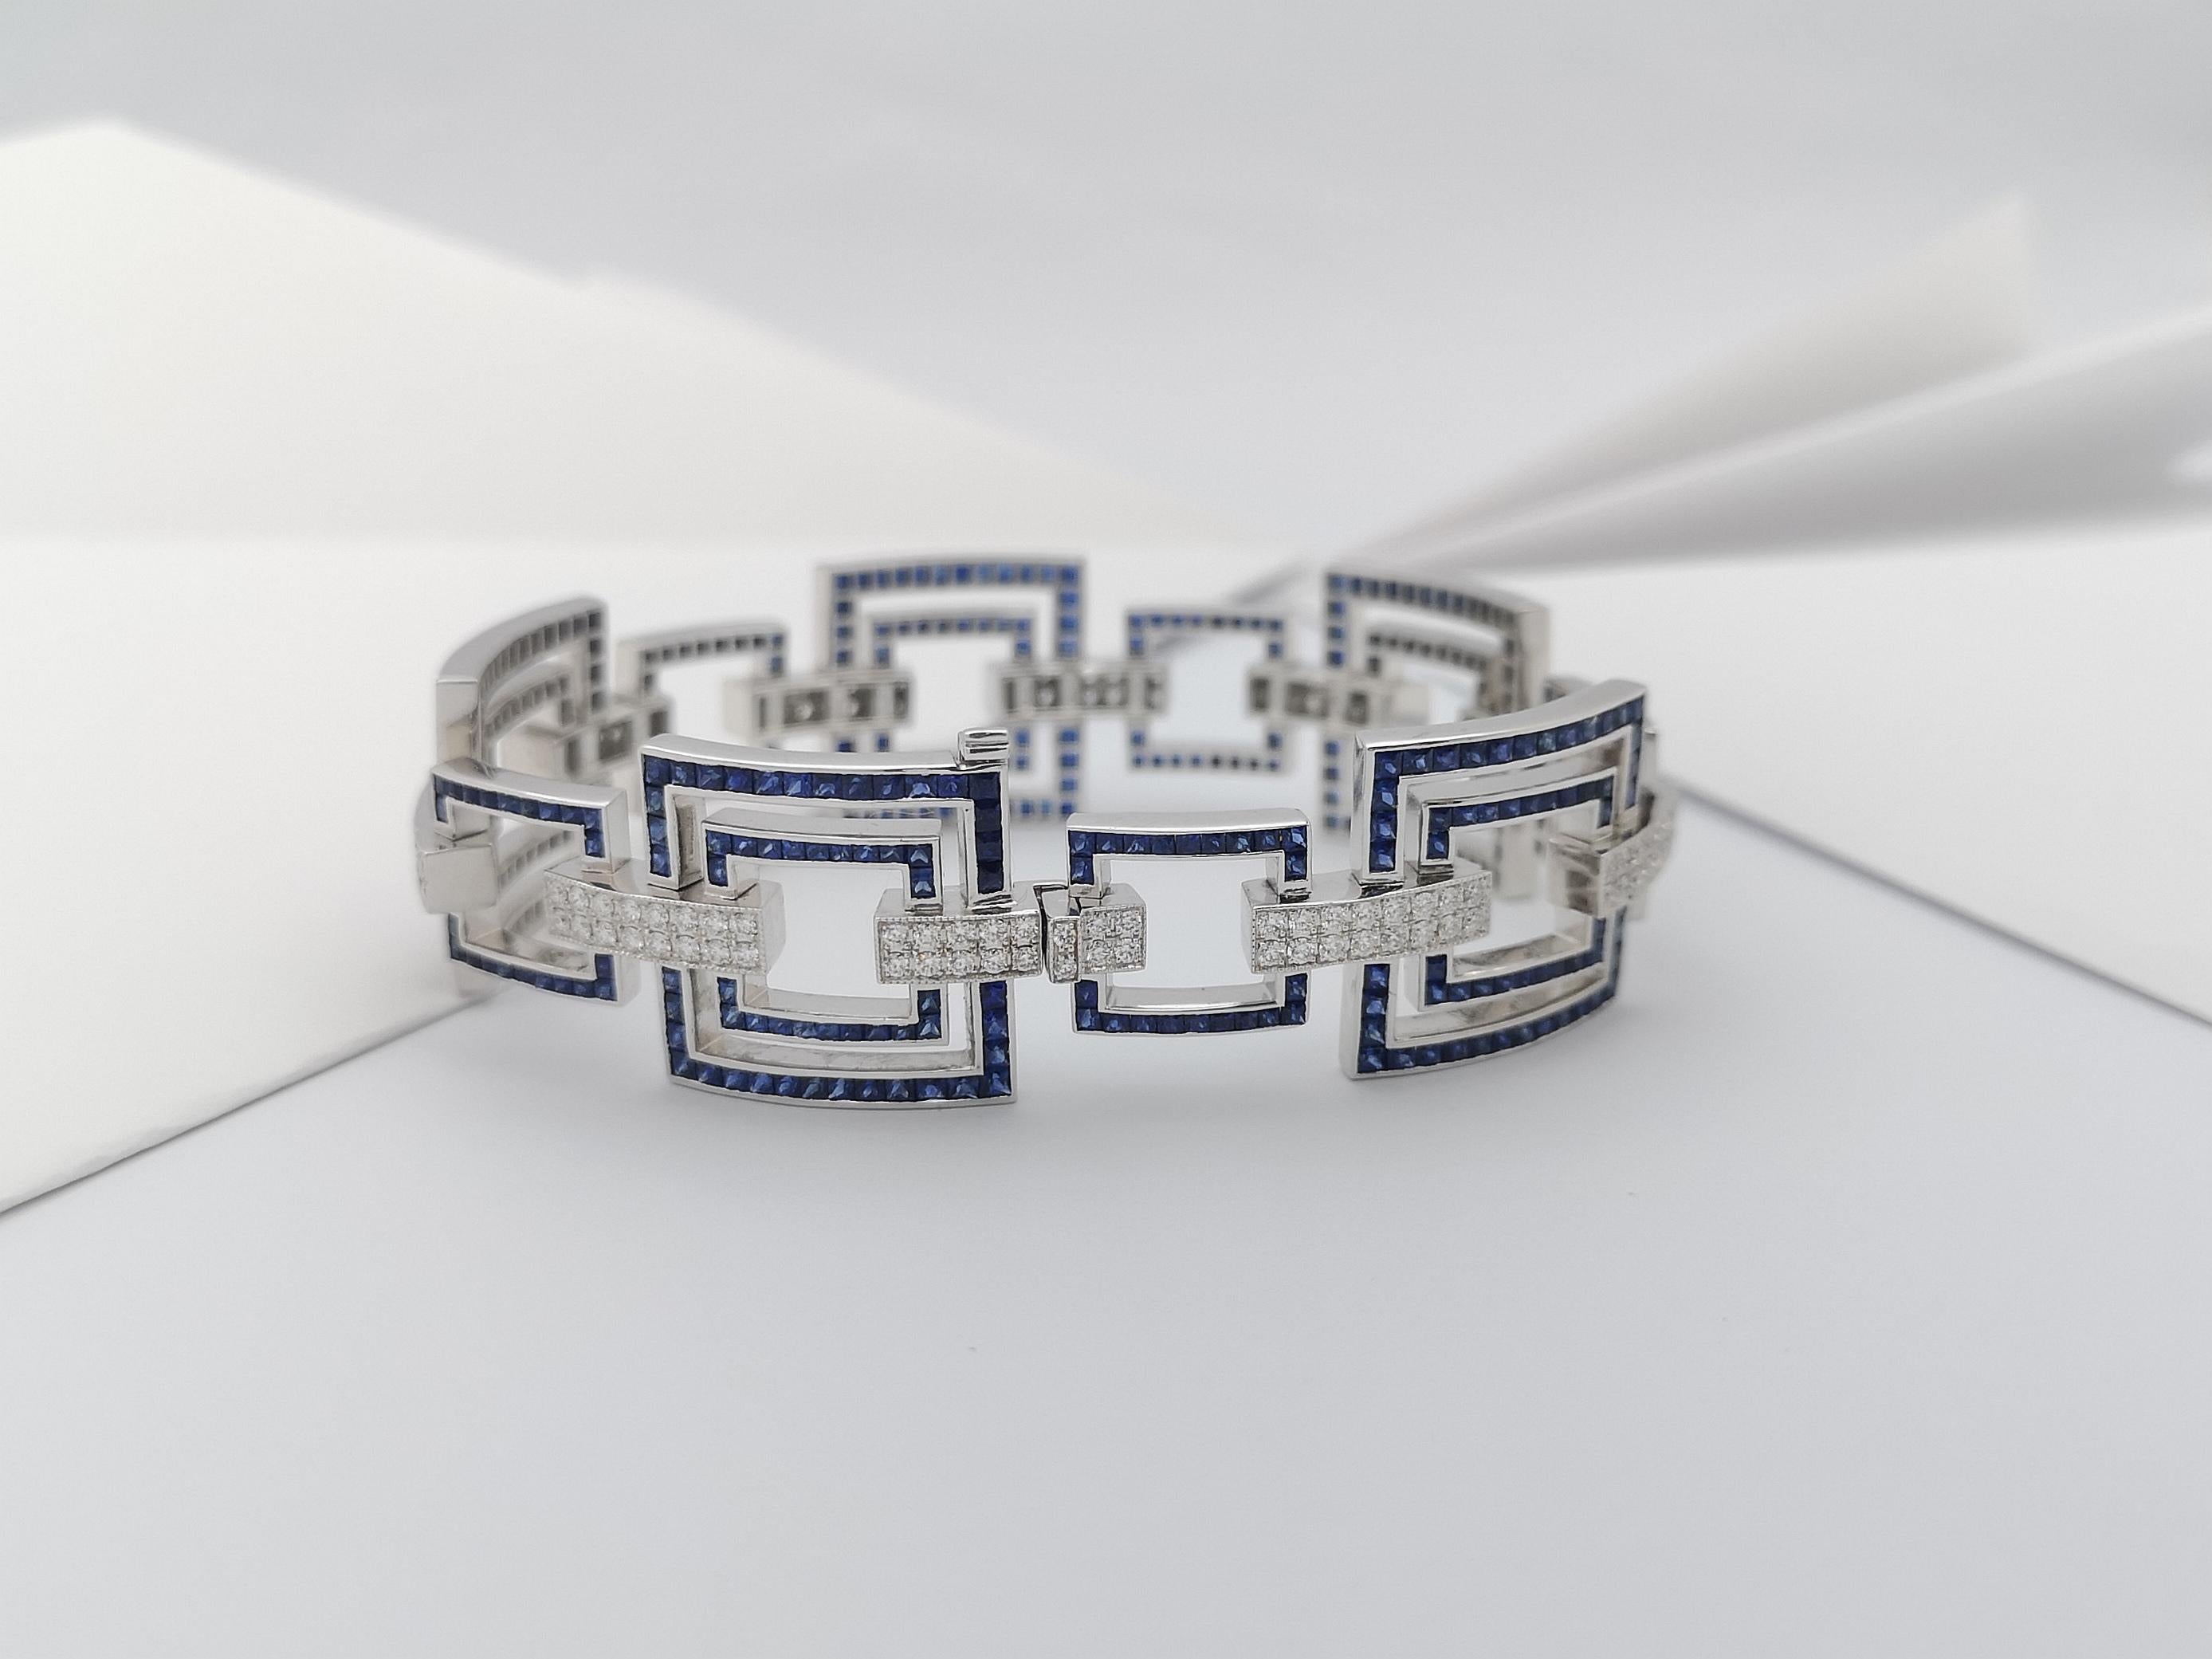 Blue Sapphire 13.43 Cts with Diamond 2.13 Cts Bracelet in 18k White Gold Setting For Sale 6